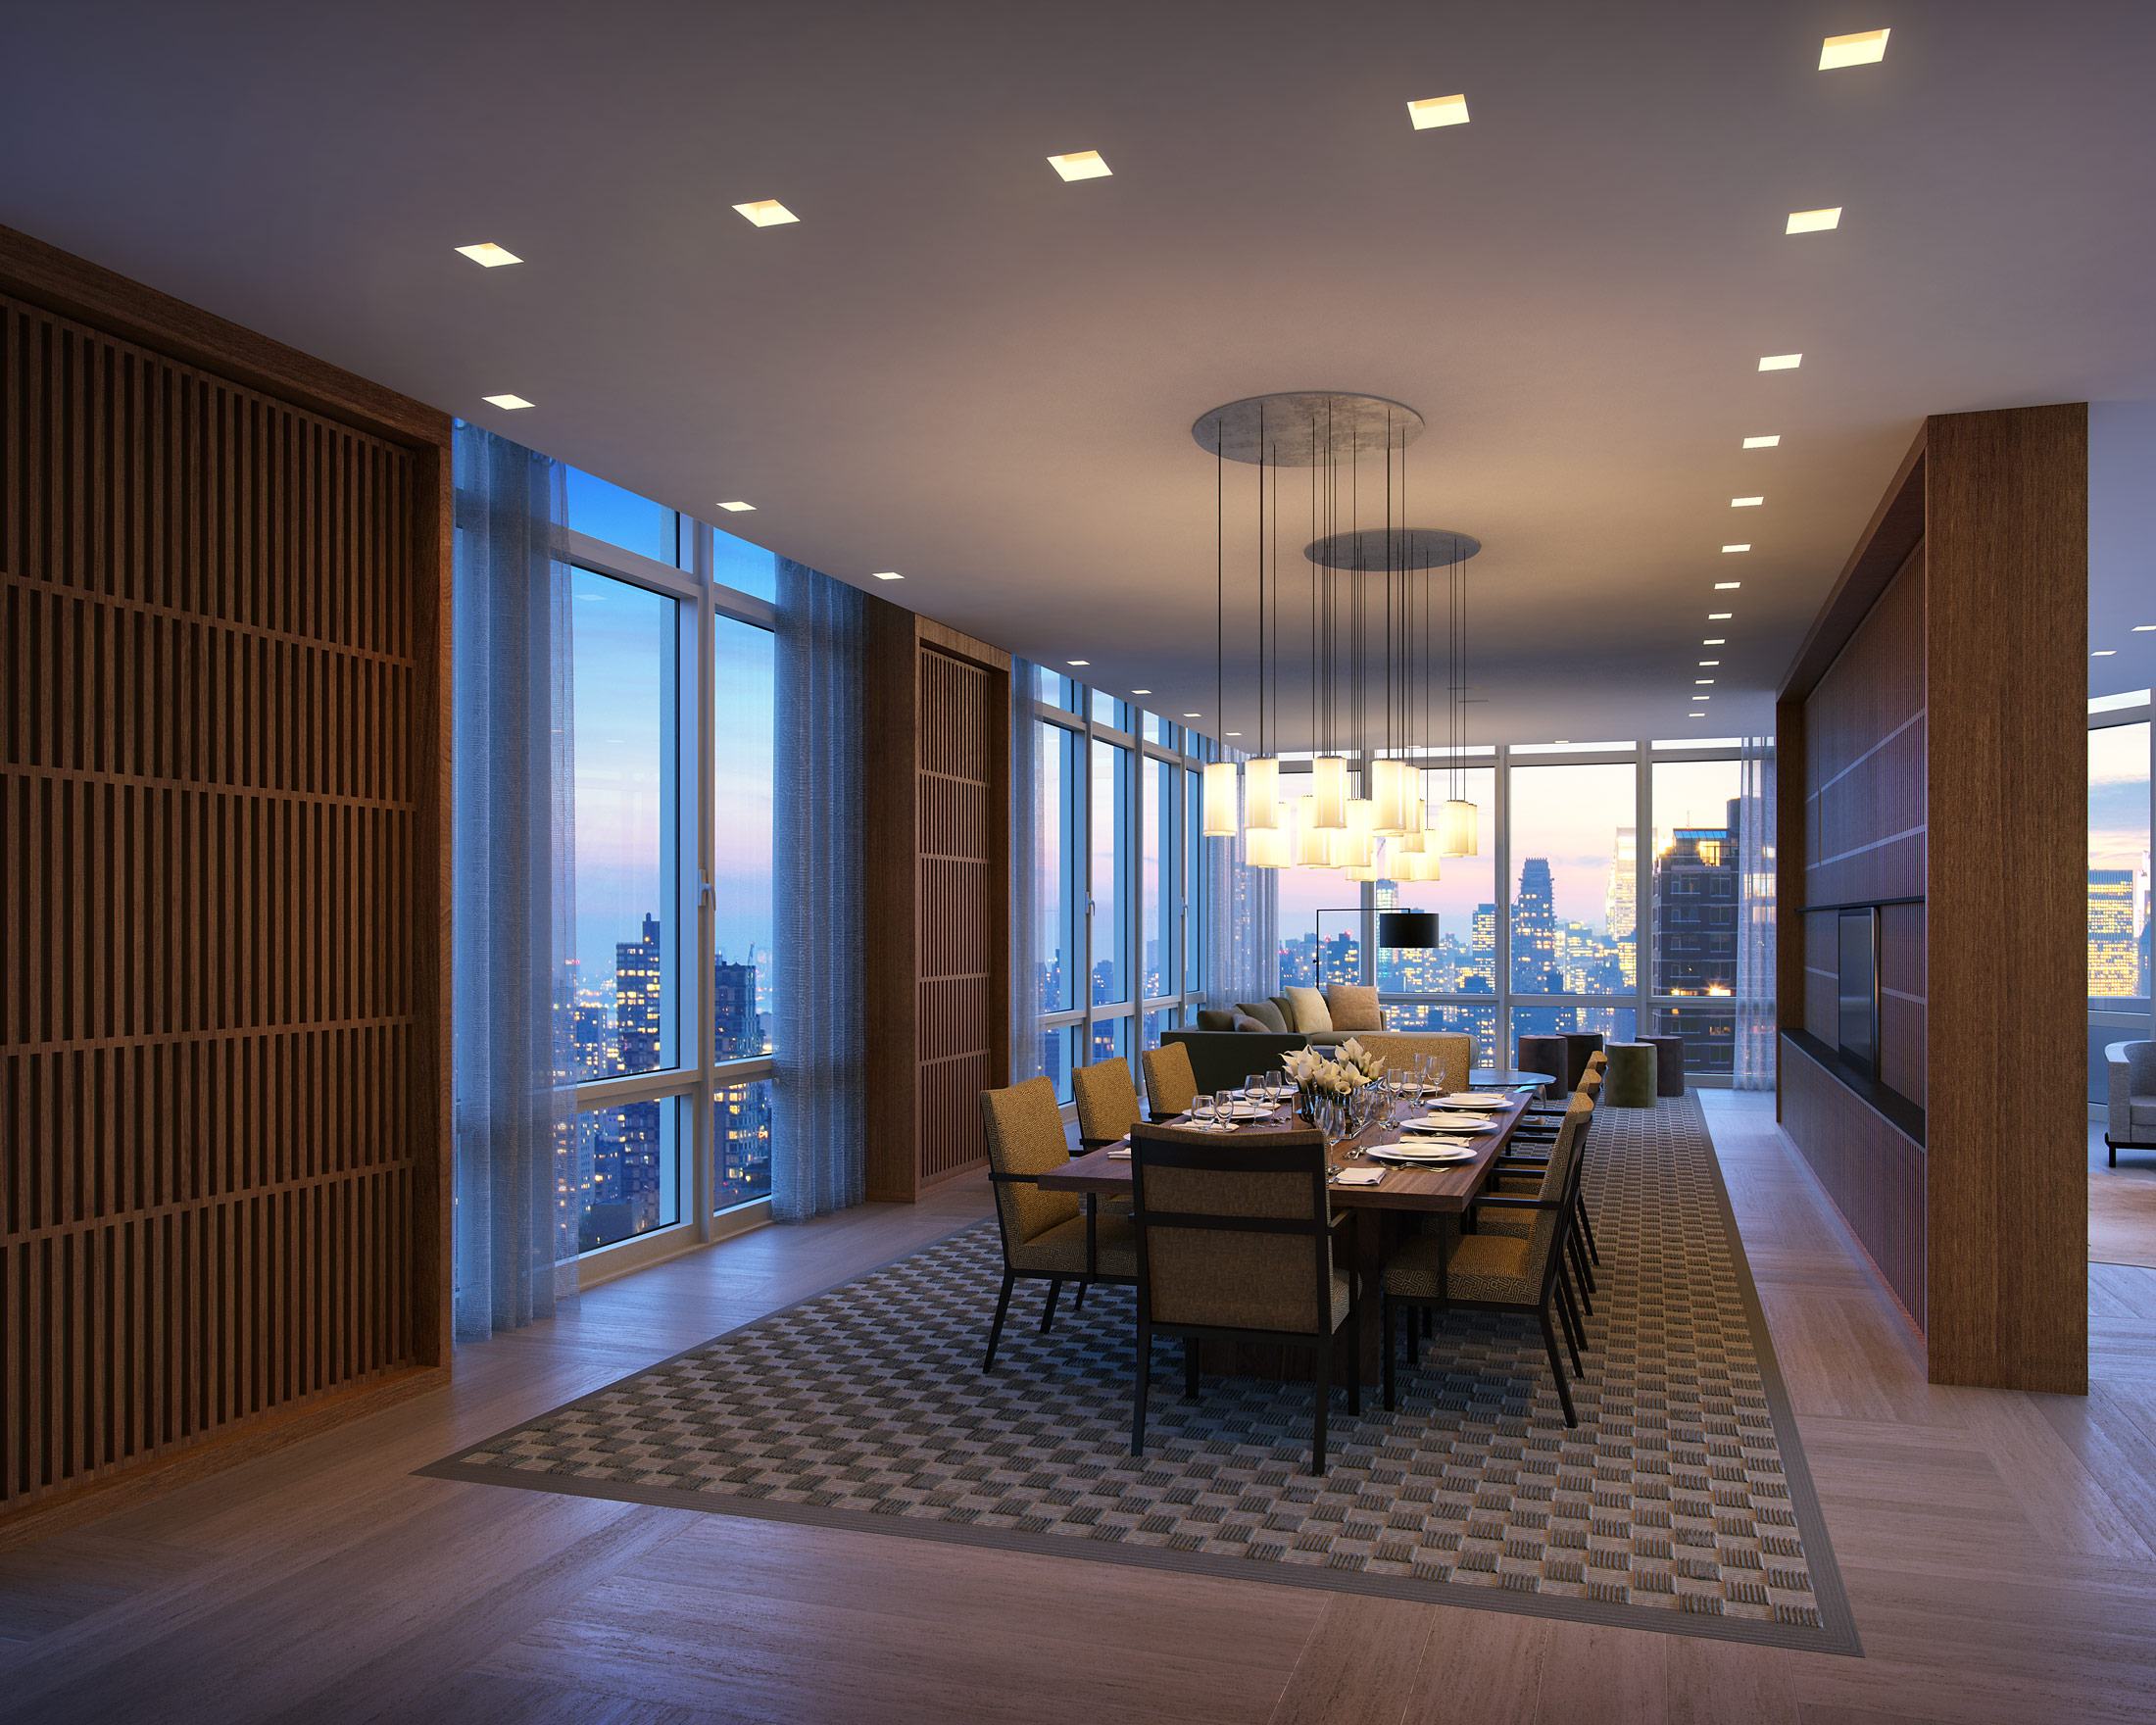 Architectural Rendering of the dining room of The Easton project located on the Upper East Side, New York City